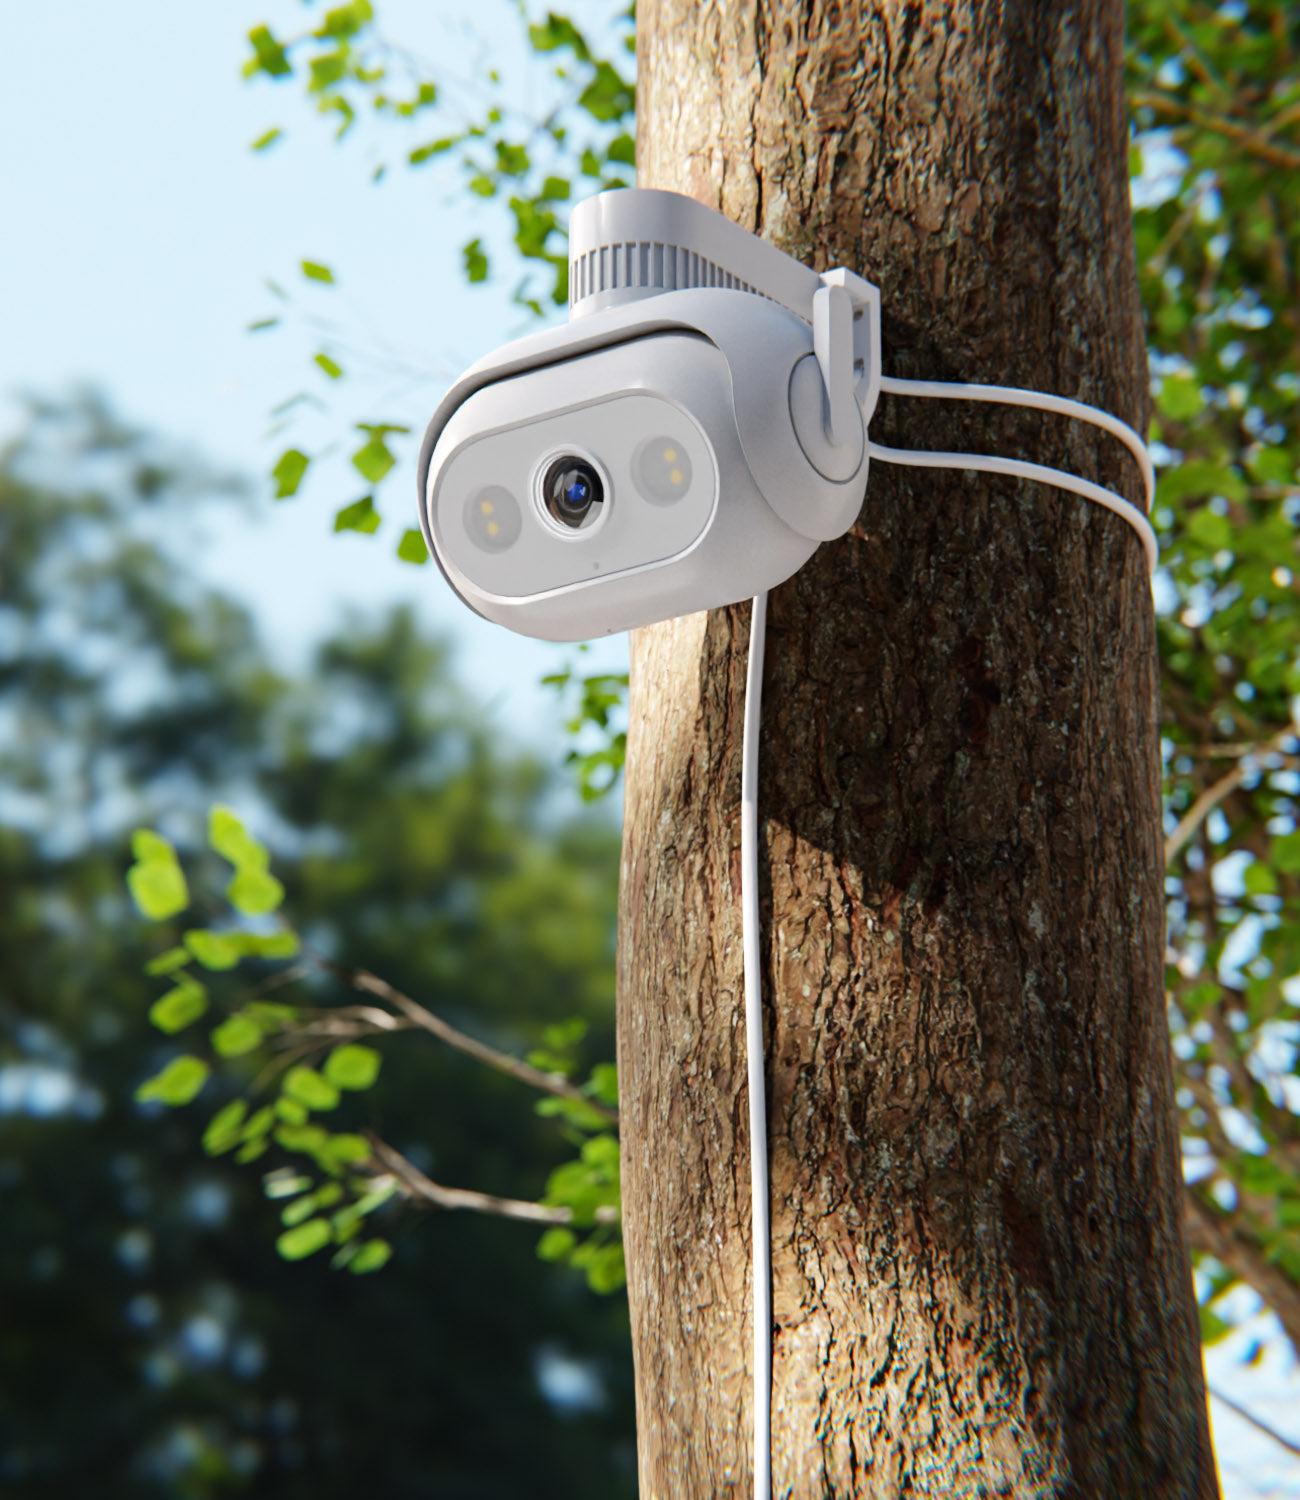 a-white-security-camera-hanged-on-tree-trunk-using-cables